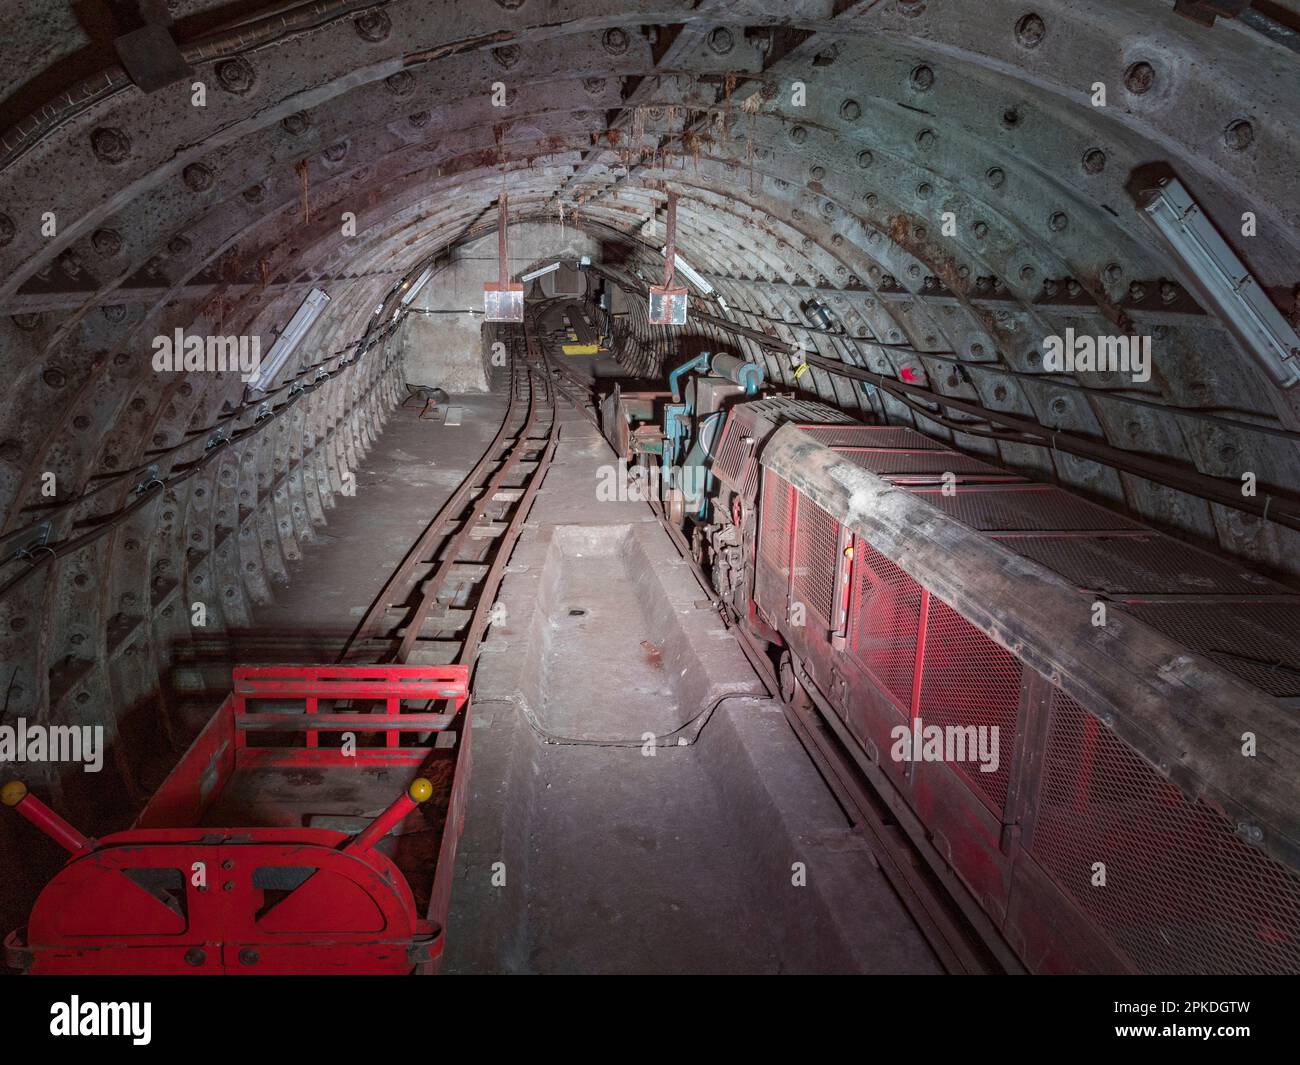 Train carriage 'graveyard' of abandoned carriages of Mail Rail, the former Post Office Railway system under the streets of central London, UK. Stock Photo